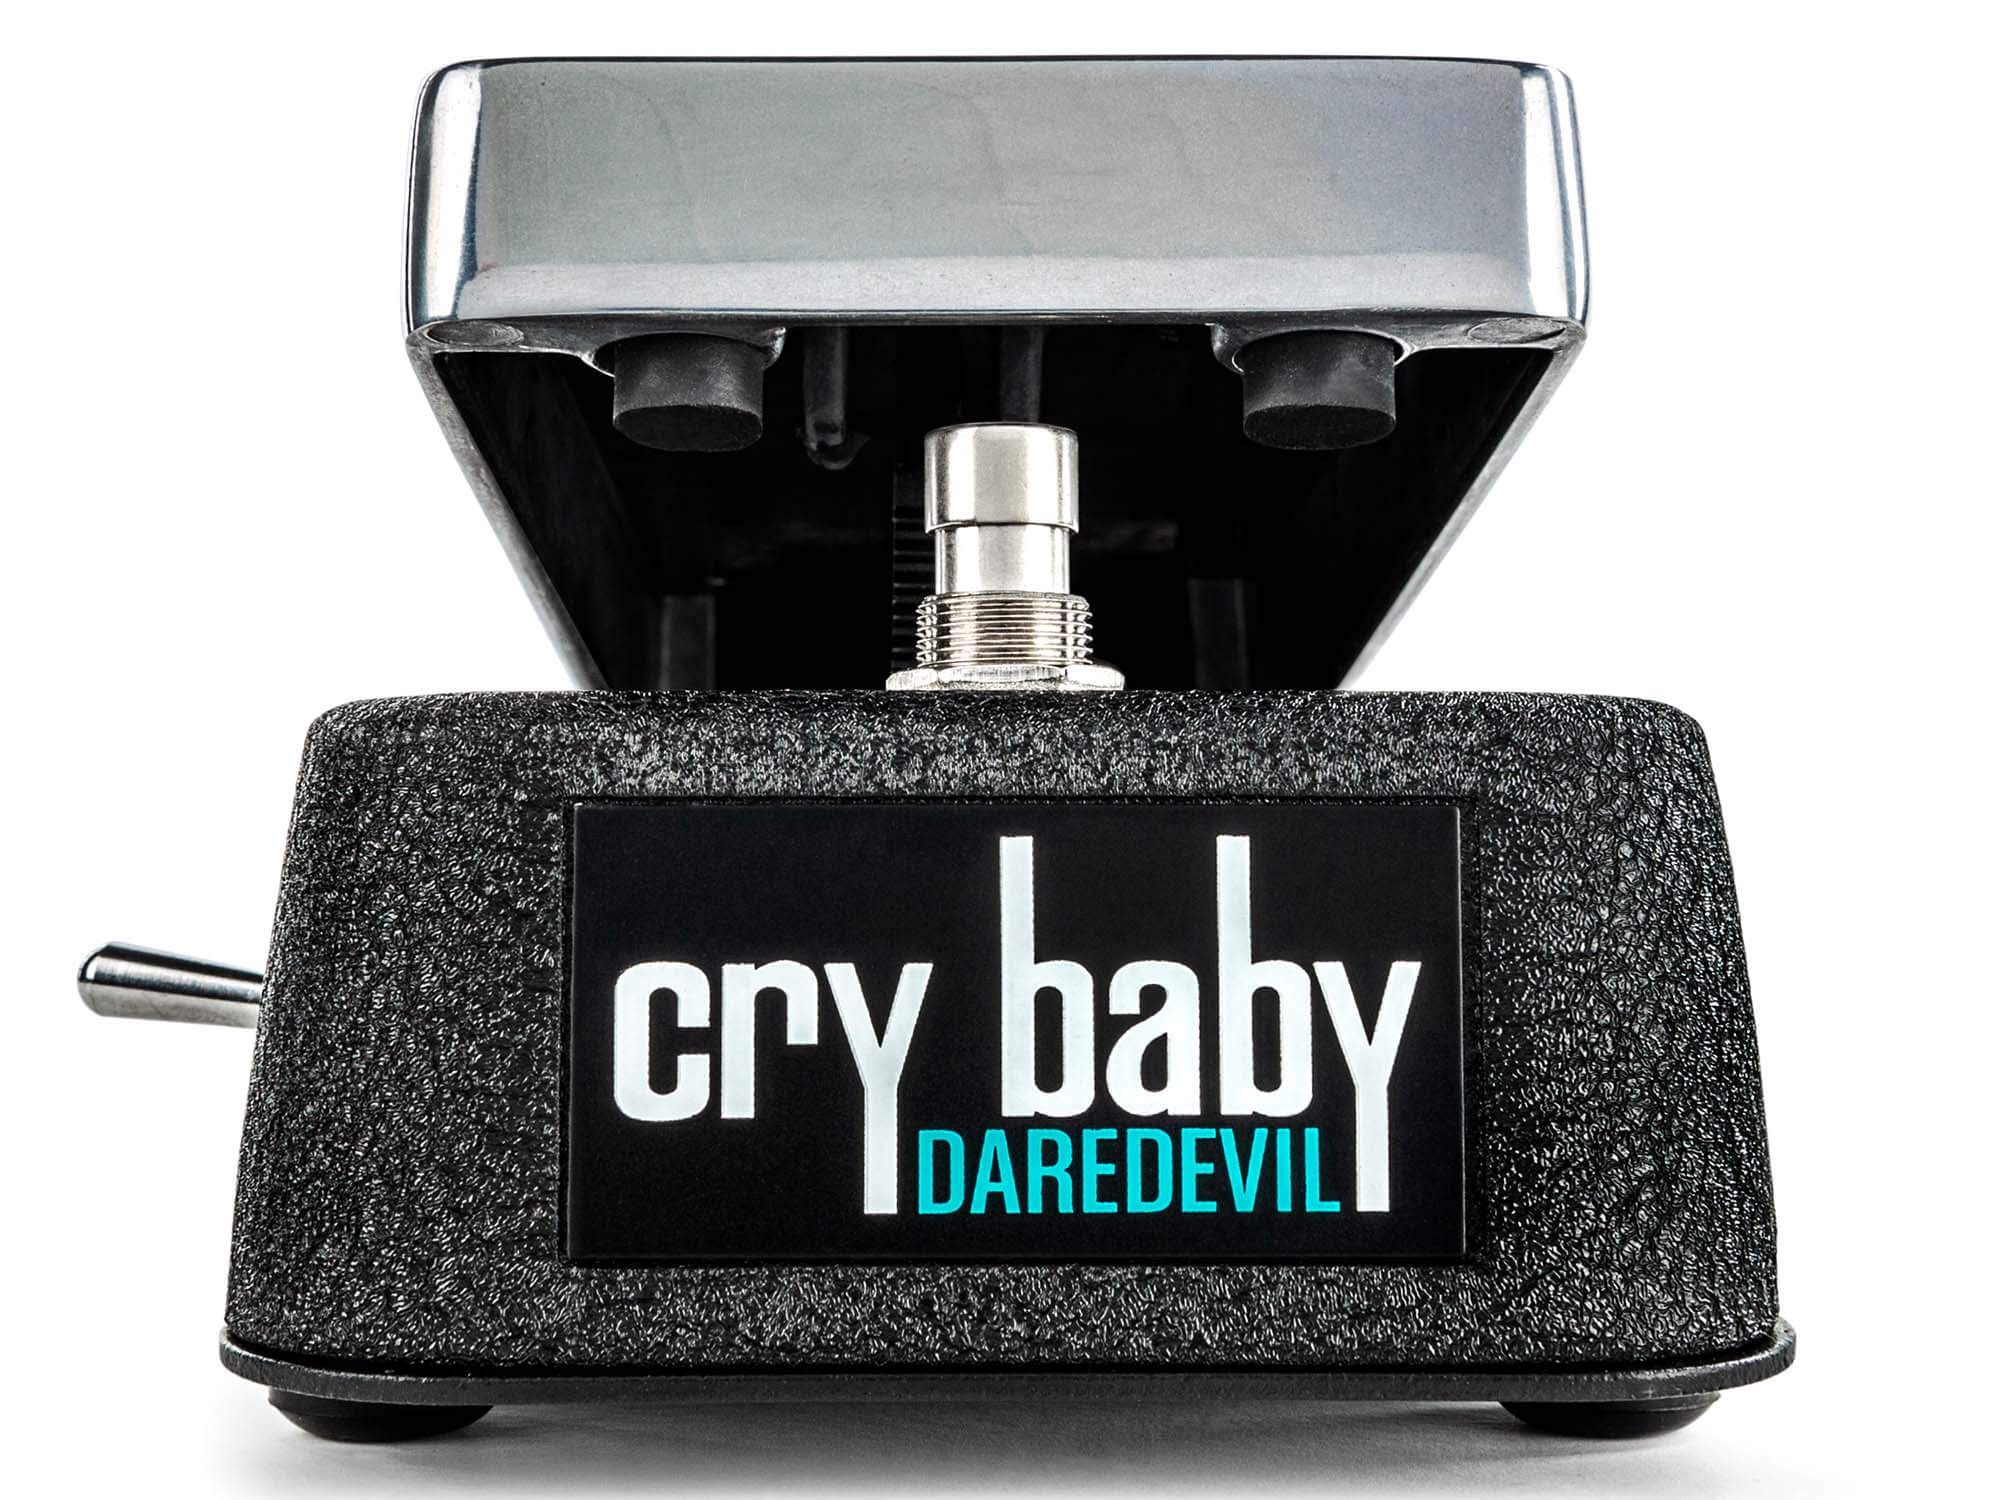 cry-baby-wah-dunlop-daredevil@2000x1500